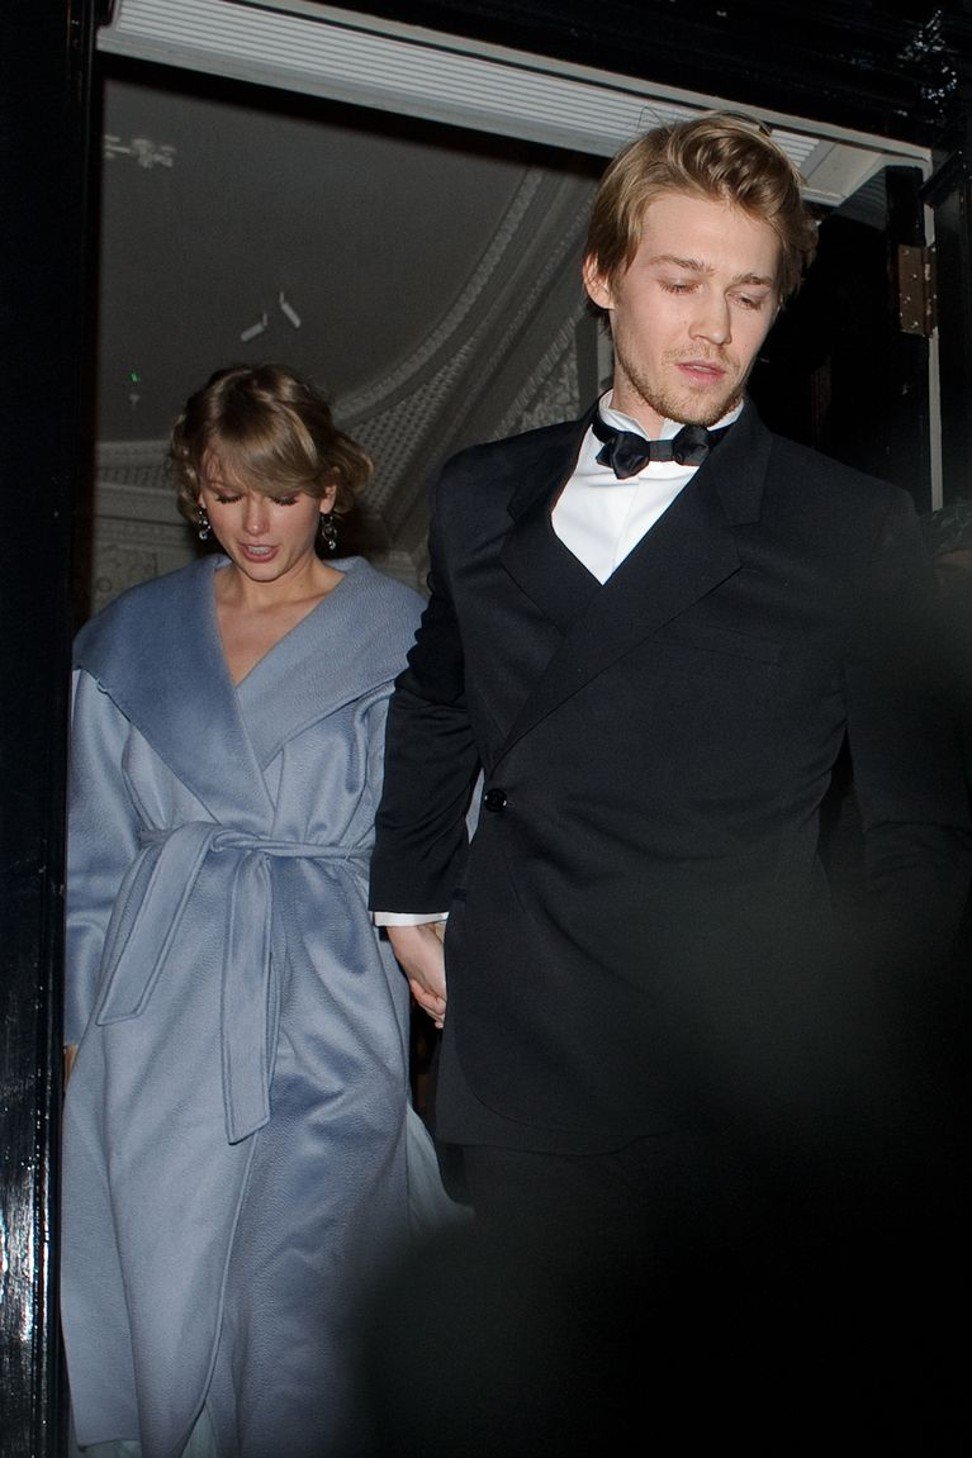 Who is Taylor Swift's British lover Joe Alwyn who is the actor of Oscar nominated movie The Favourite? Why did he appear in the documentary Miss Americana? Read to find out. 11